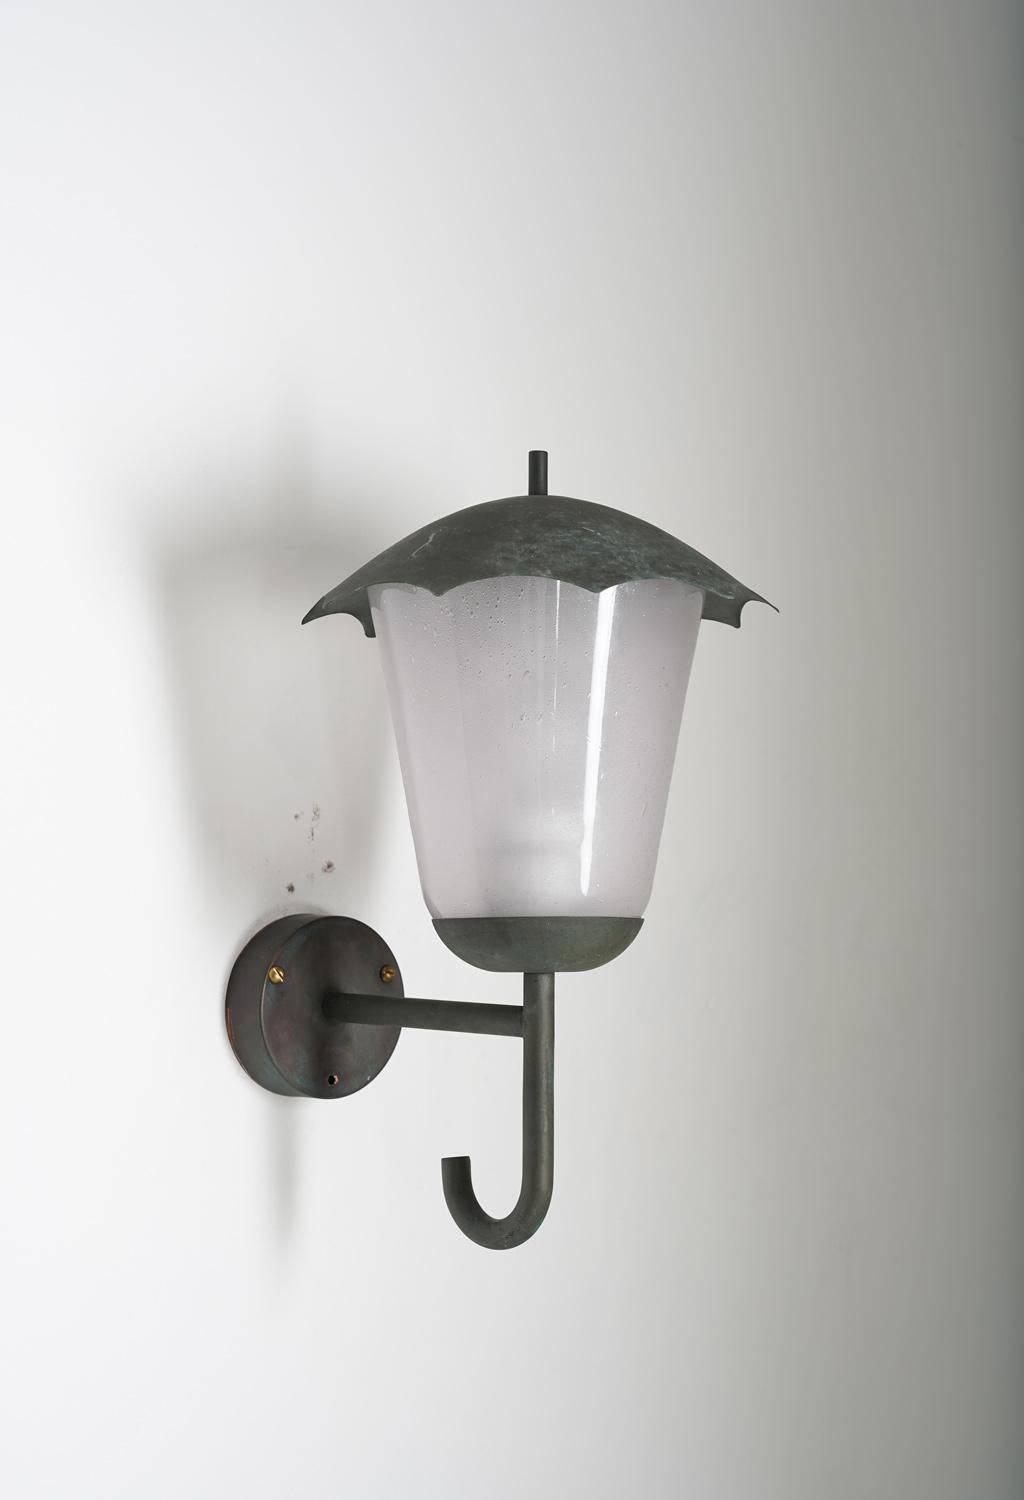 Rare outdoor wall lamp in copper and glass, manufactured in Sweden circa 1940. 
The playful design that reminds of an umbrella, combined with high-quality construction makes this lamp very attractive. 

Condition: Very good original condition